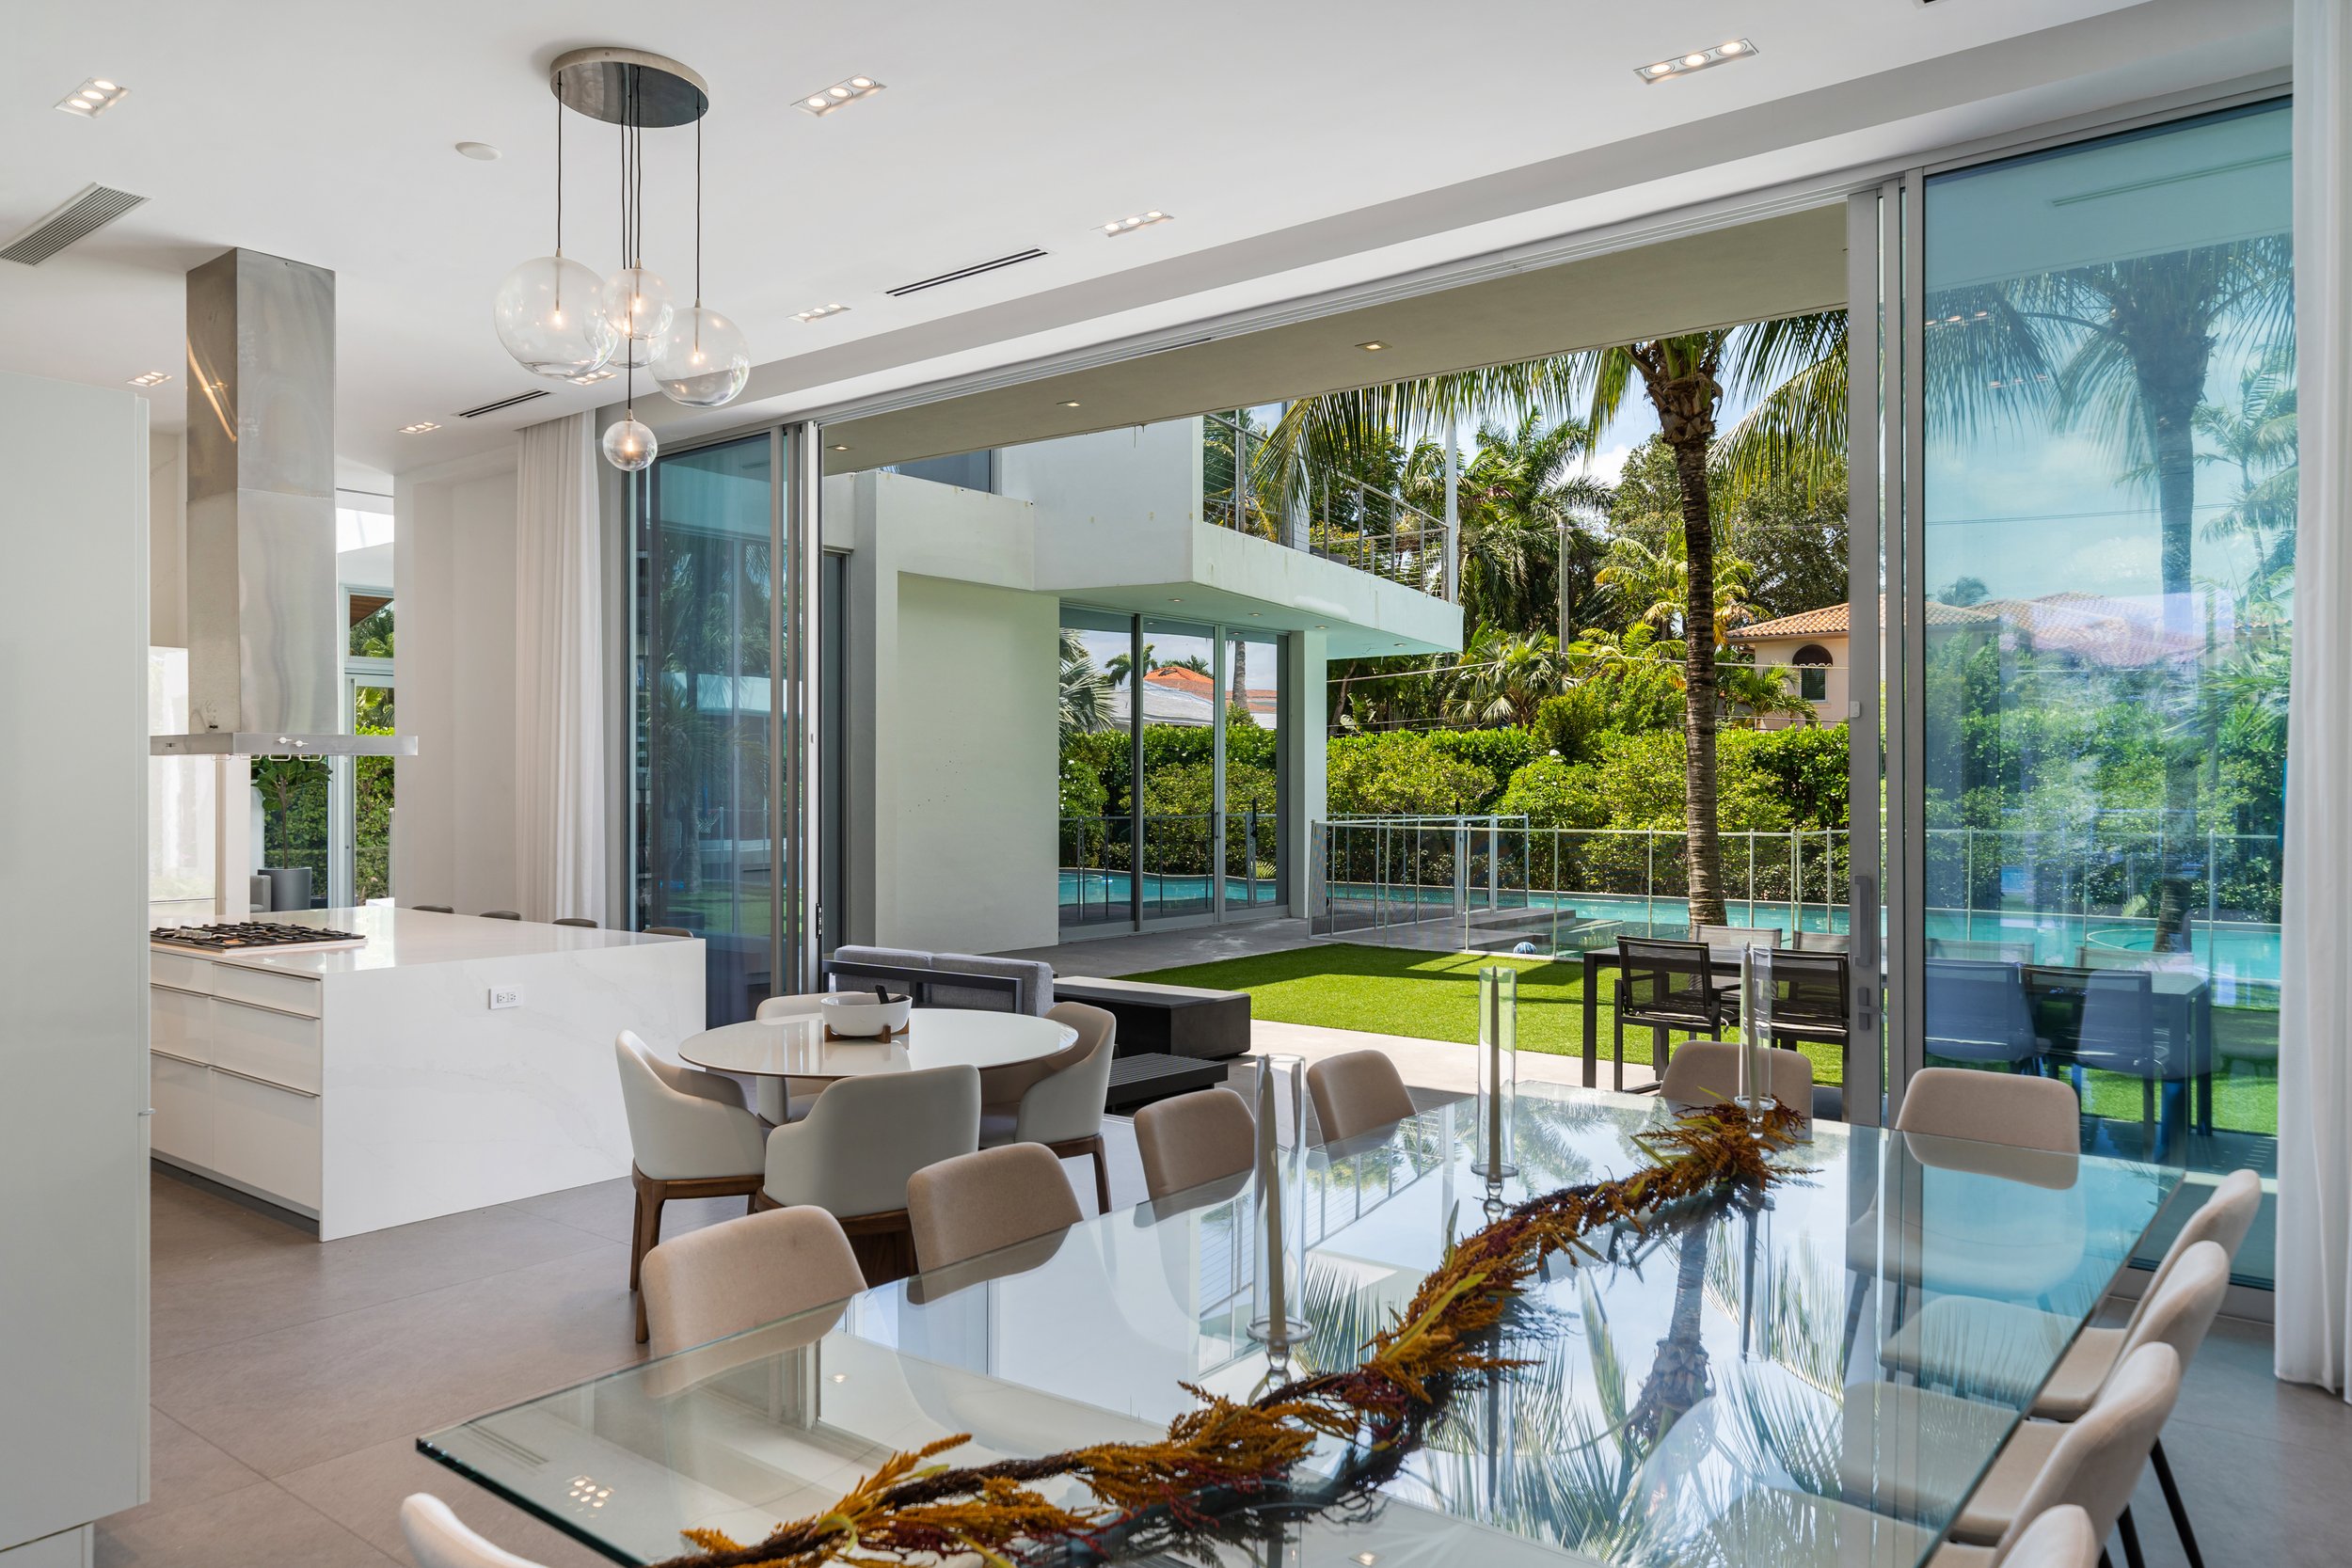 Miami Heat Star Victor Oladipo Lists Hibiscus Island Contemporary For $10 Million Amidst NBA Finals 6.jpg